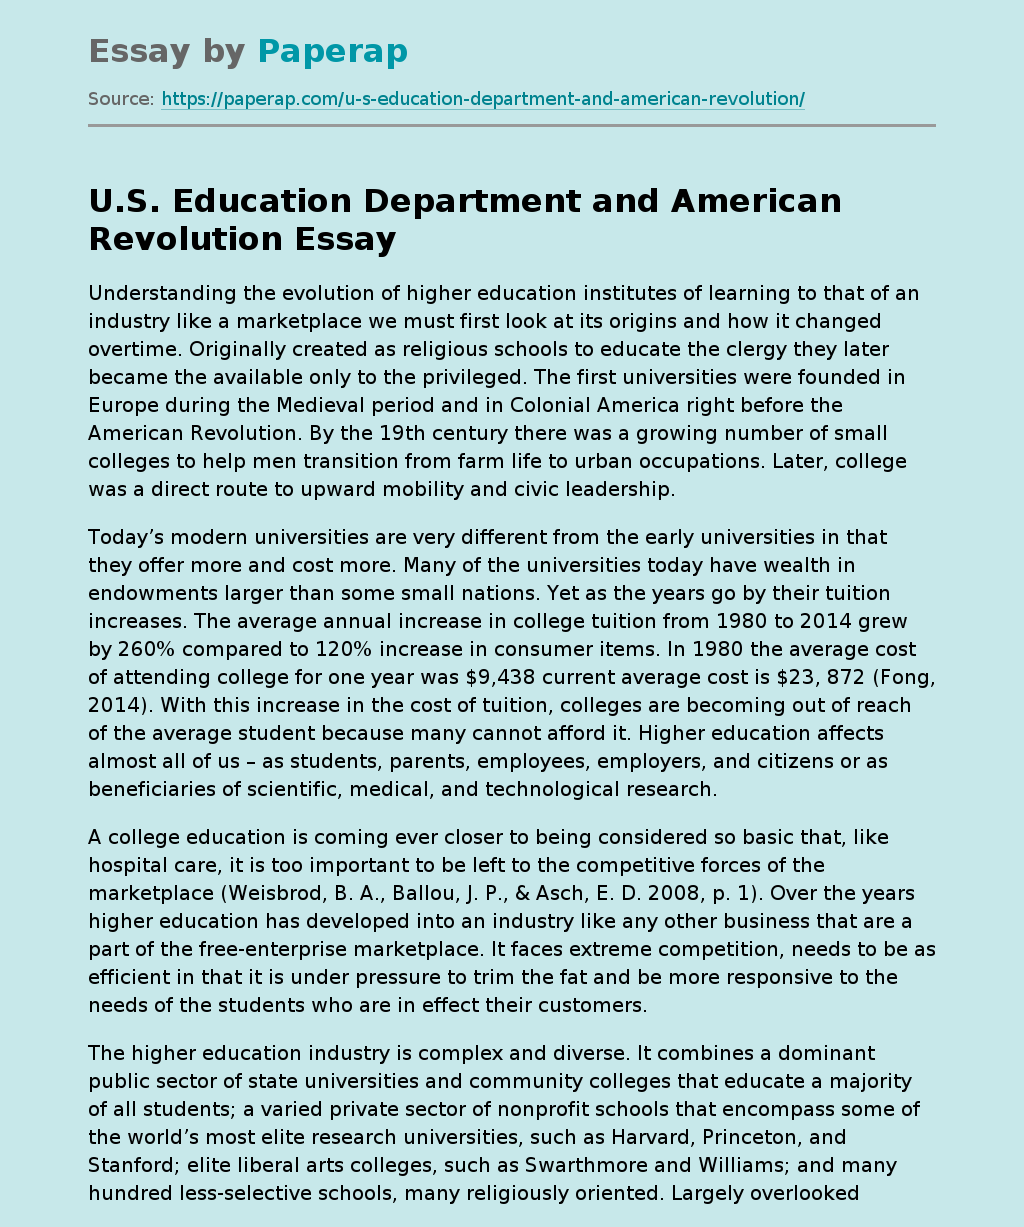 U.S. Education Department and American Revolution